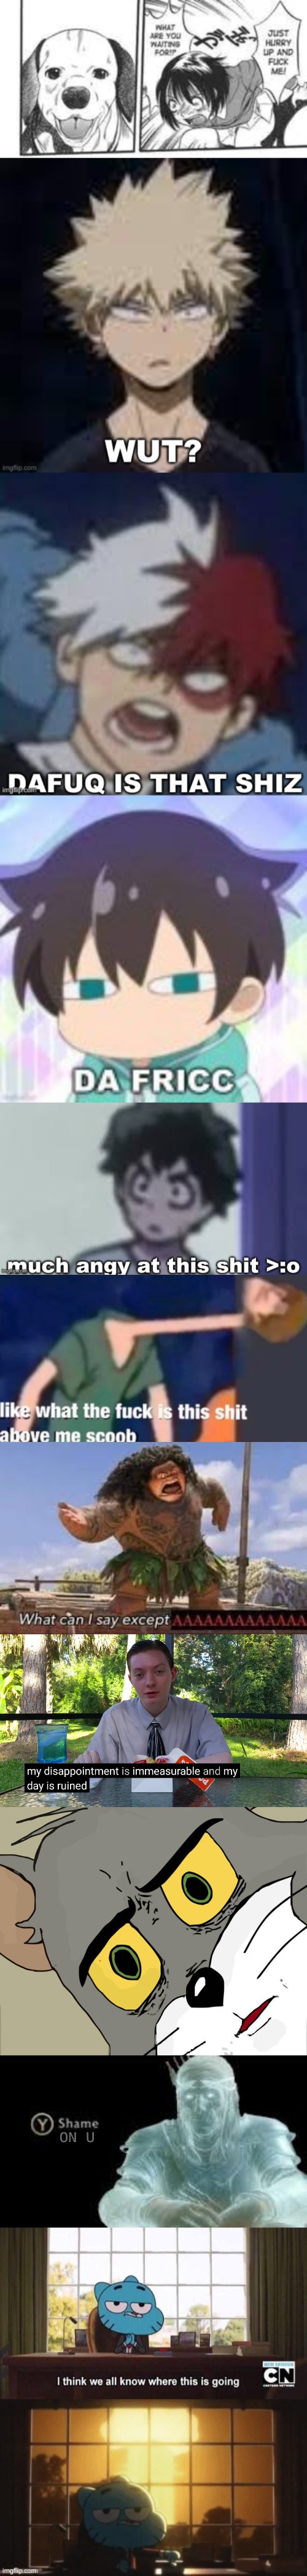 wtf bro | ON U | image tagged in wut,dafuq is that shiz,da fricc,much angy at this shiz,like what the f ck is this sh t above me scoob | made w/ Imgflip meme maker